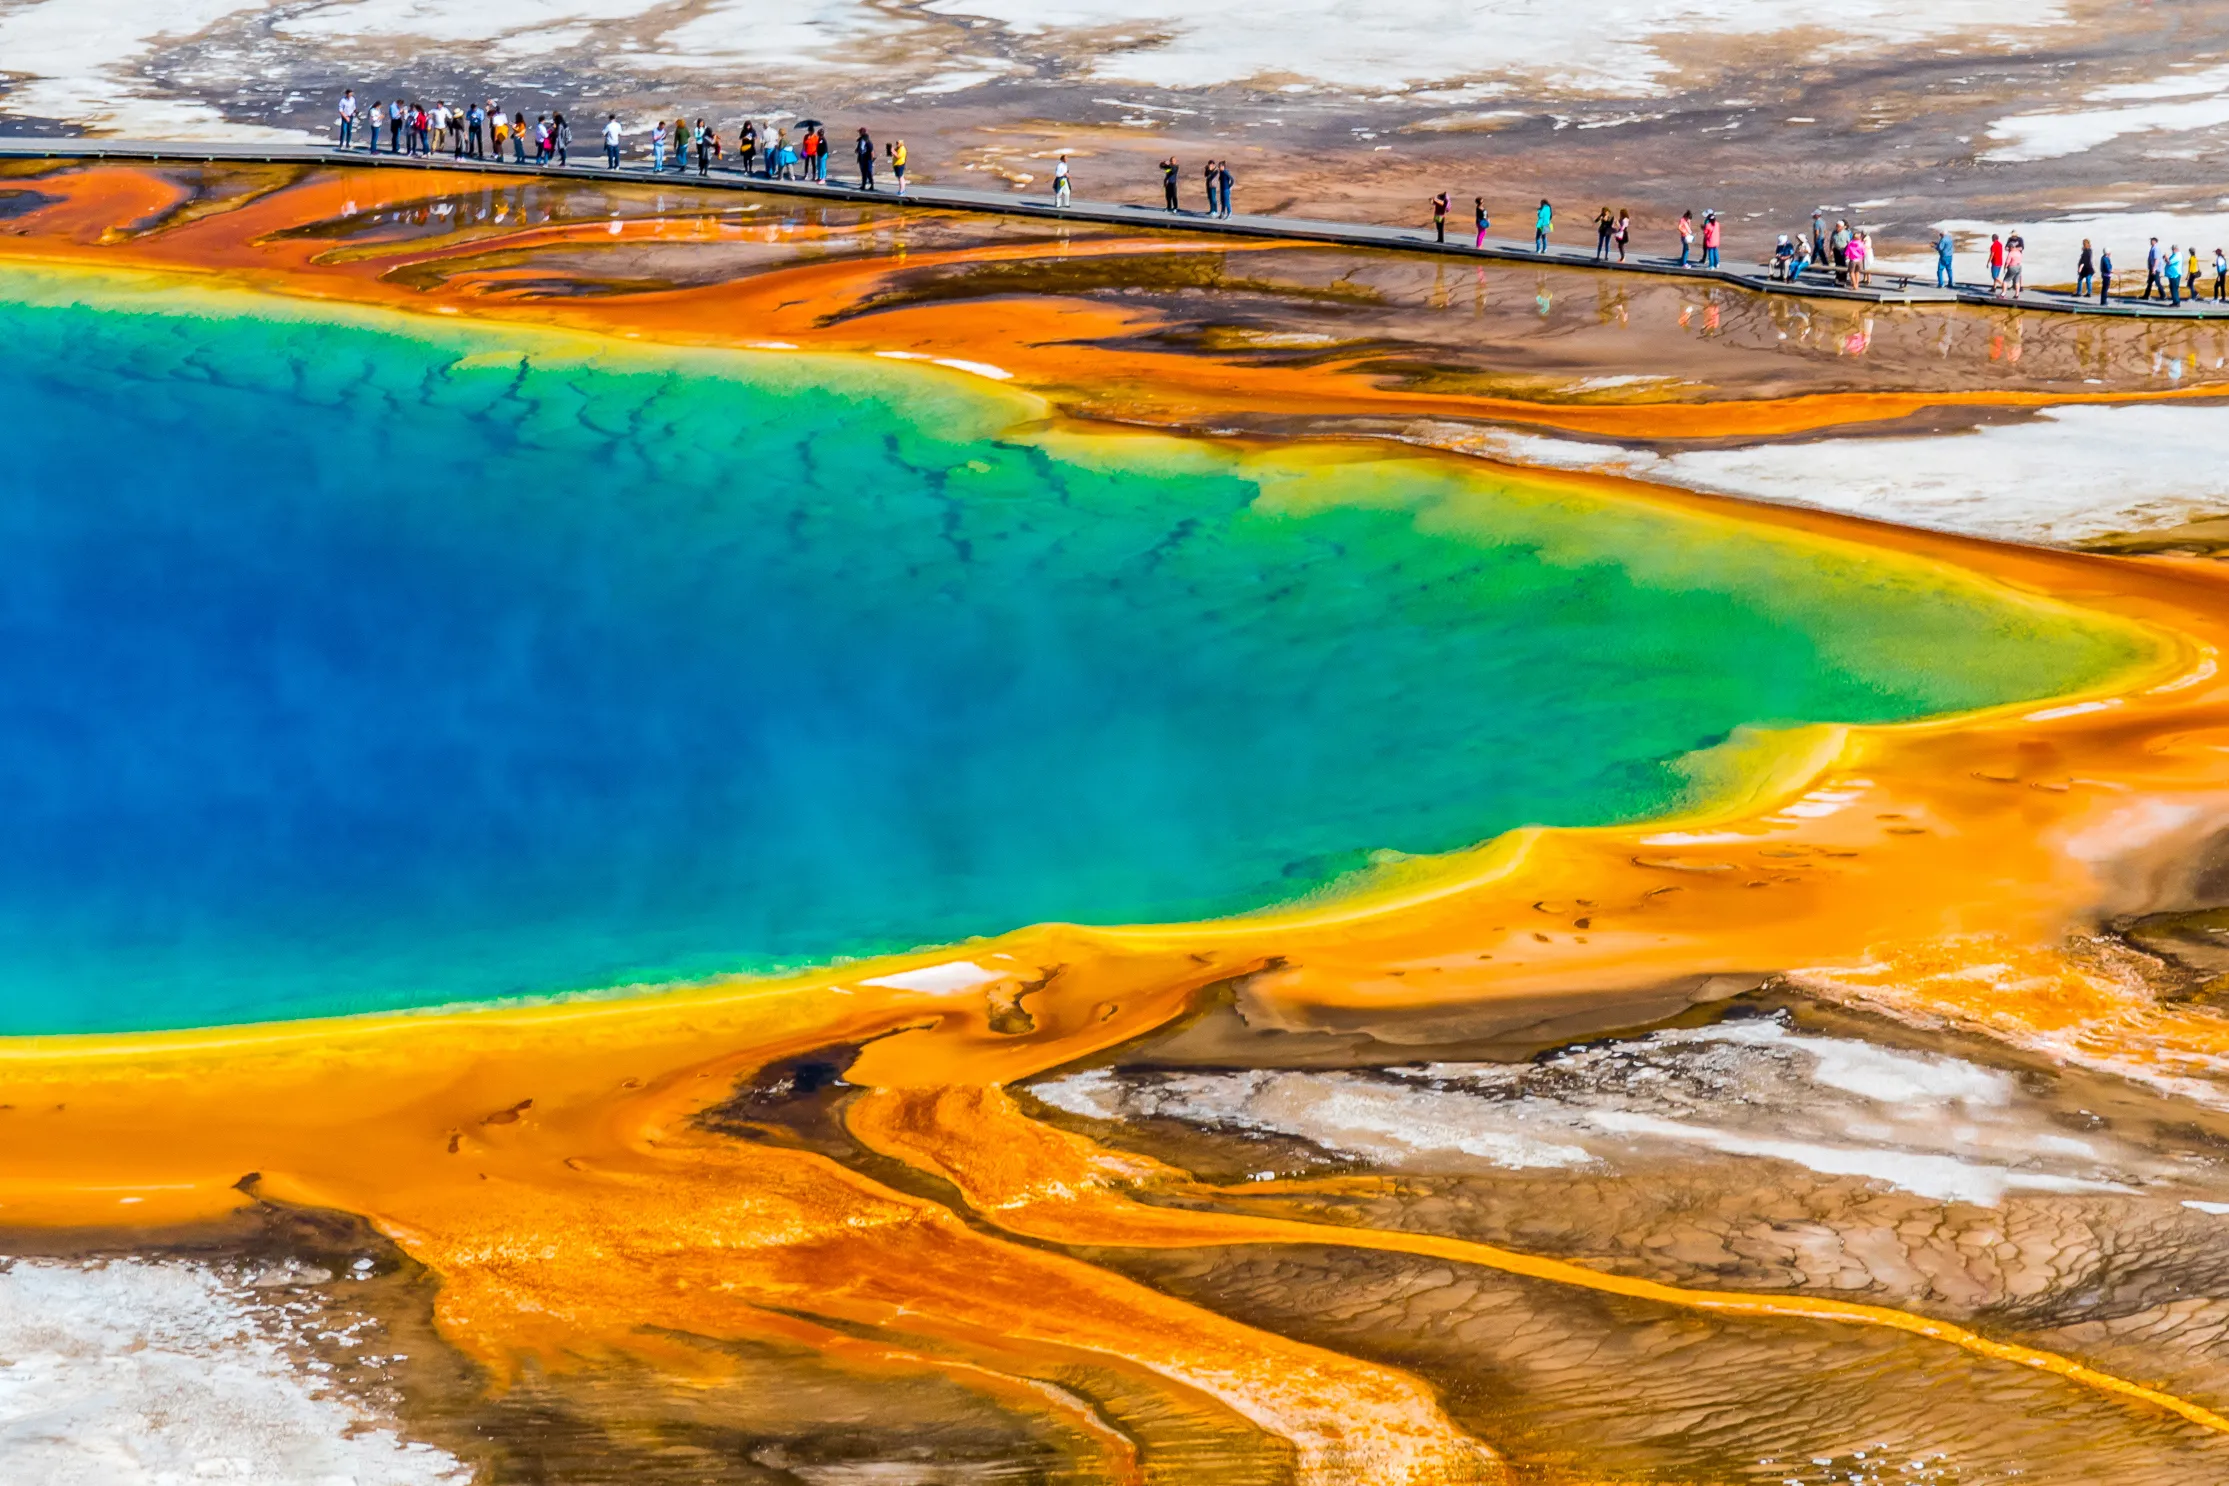 5 Stunning Natural Wonders You Can See in the U.S.